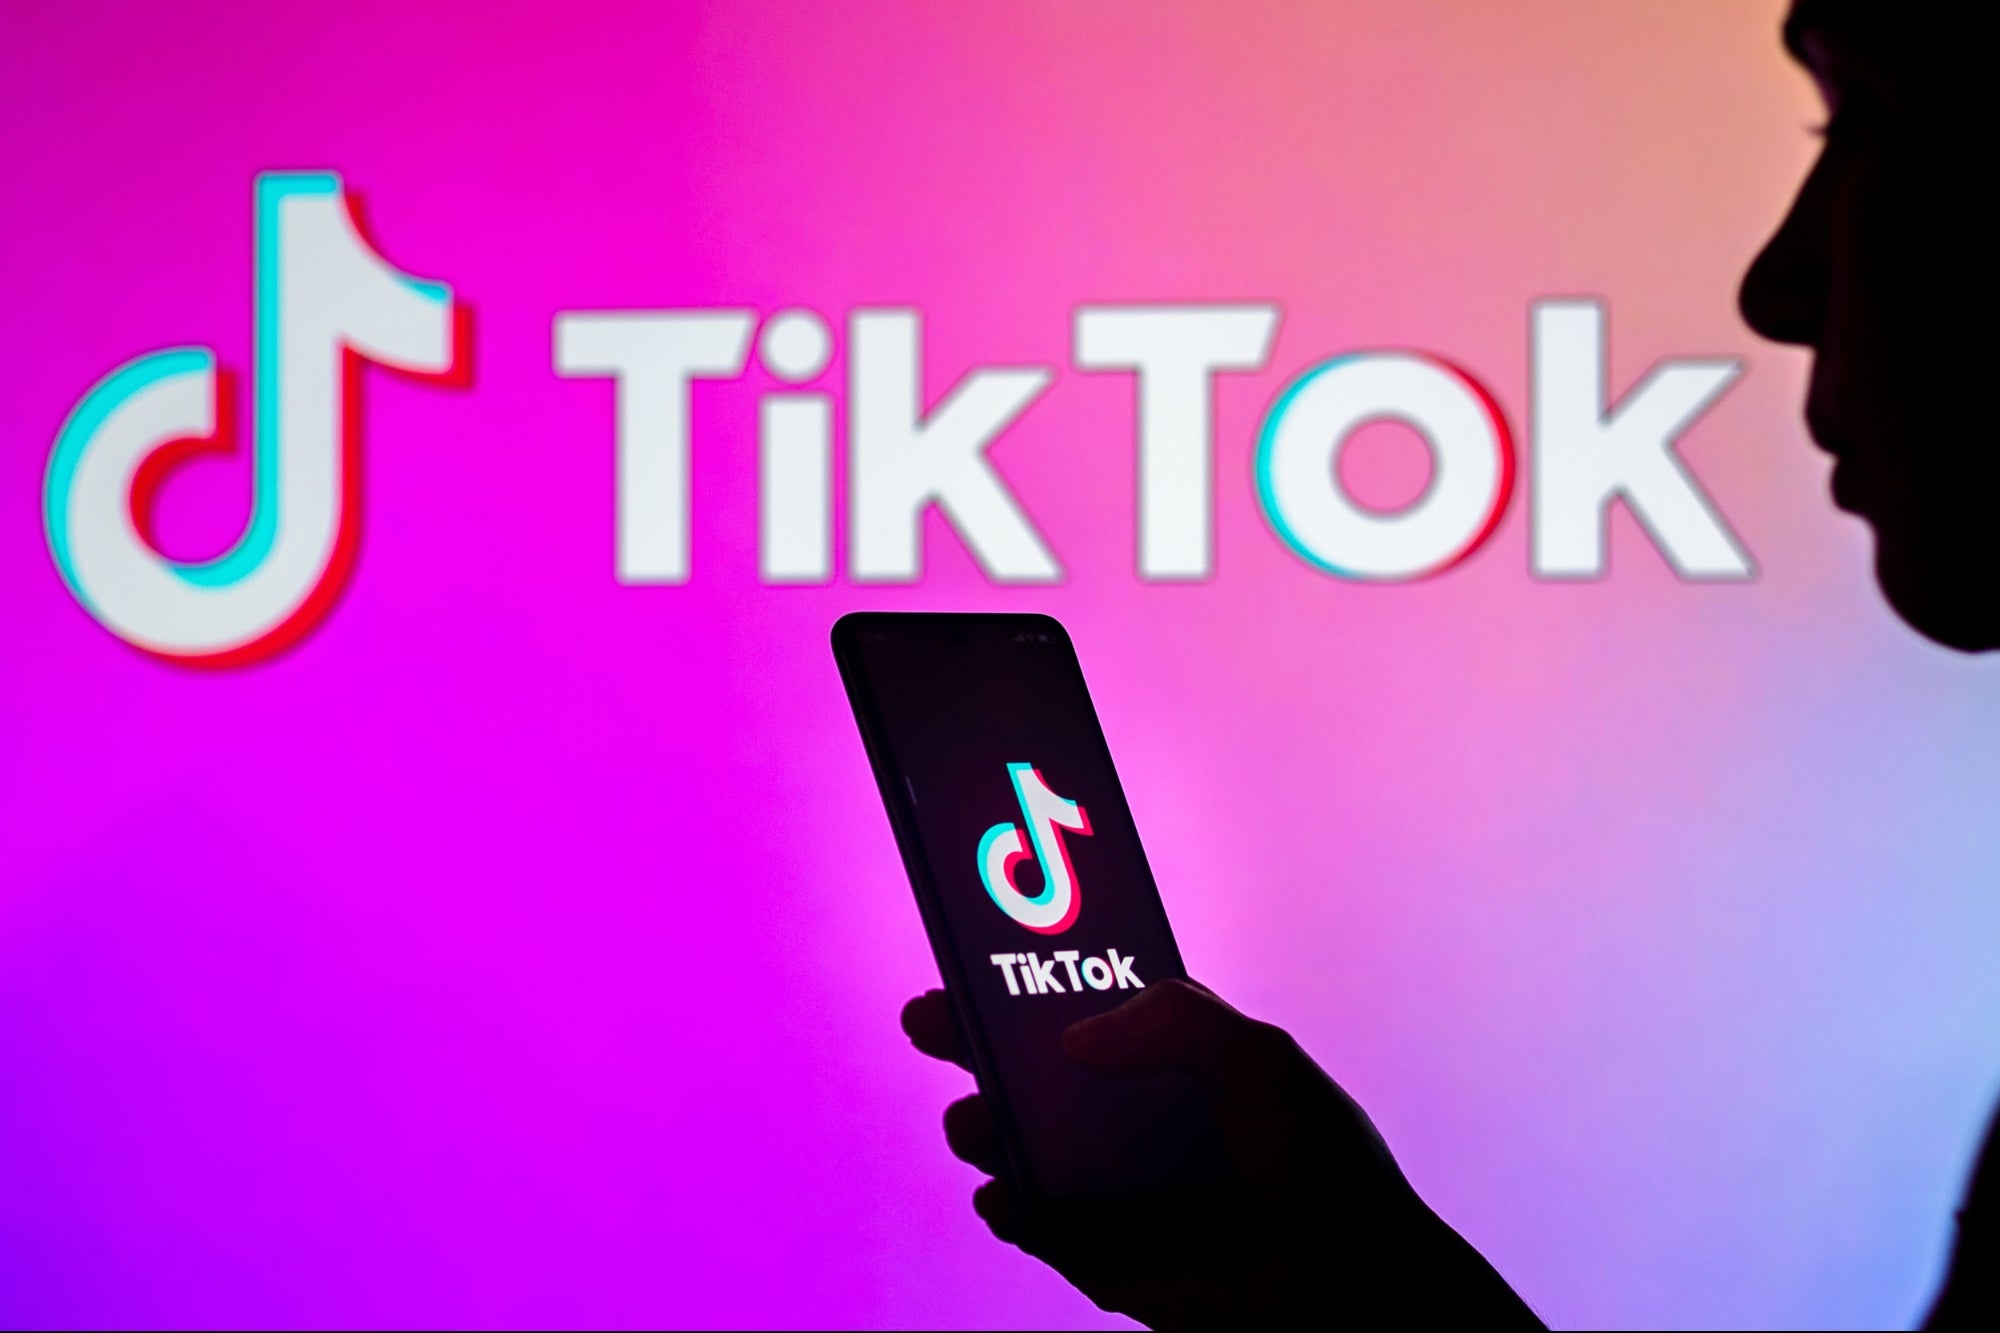 3 TikTok Trends Brands Must Pay Attention To